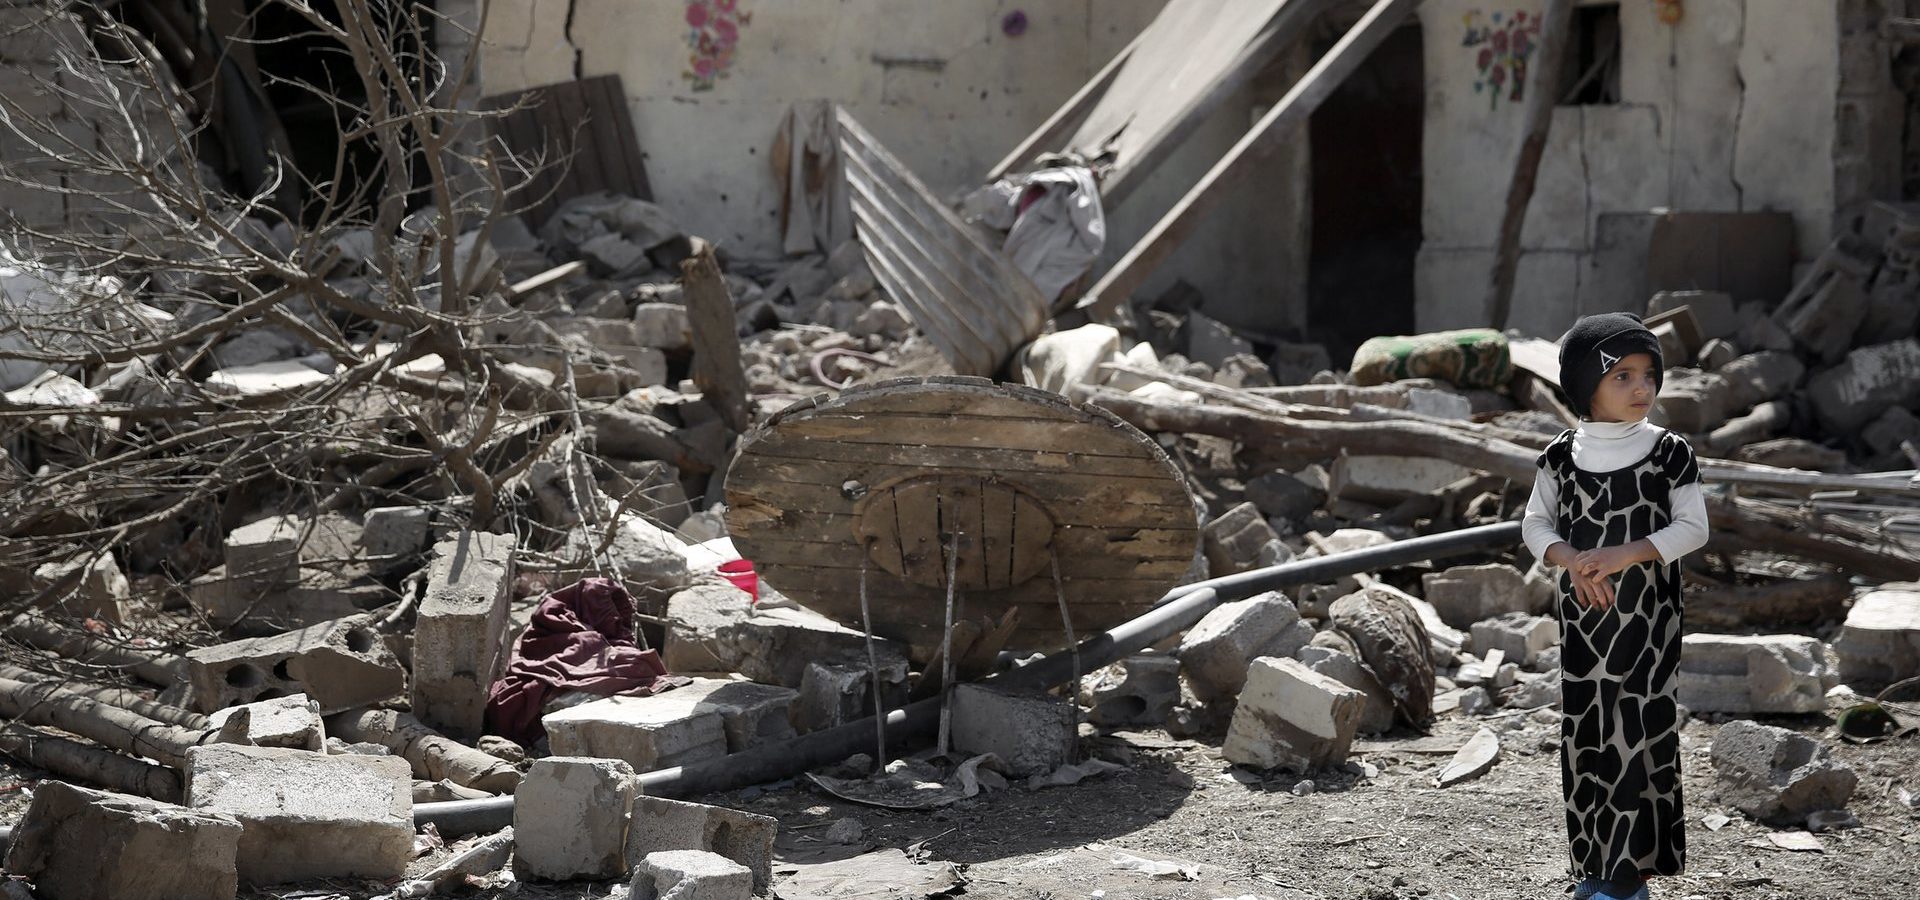 The remains of a house destroyed by a Saudi-led airstrike in Yemen’s capital on Thursday. Photograph: Hani Mohammed/AP